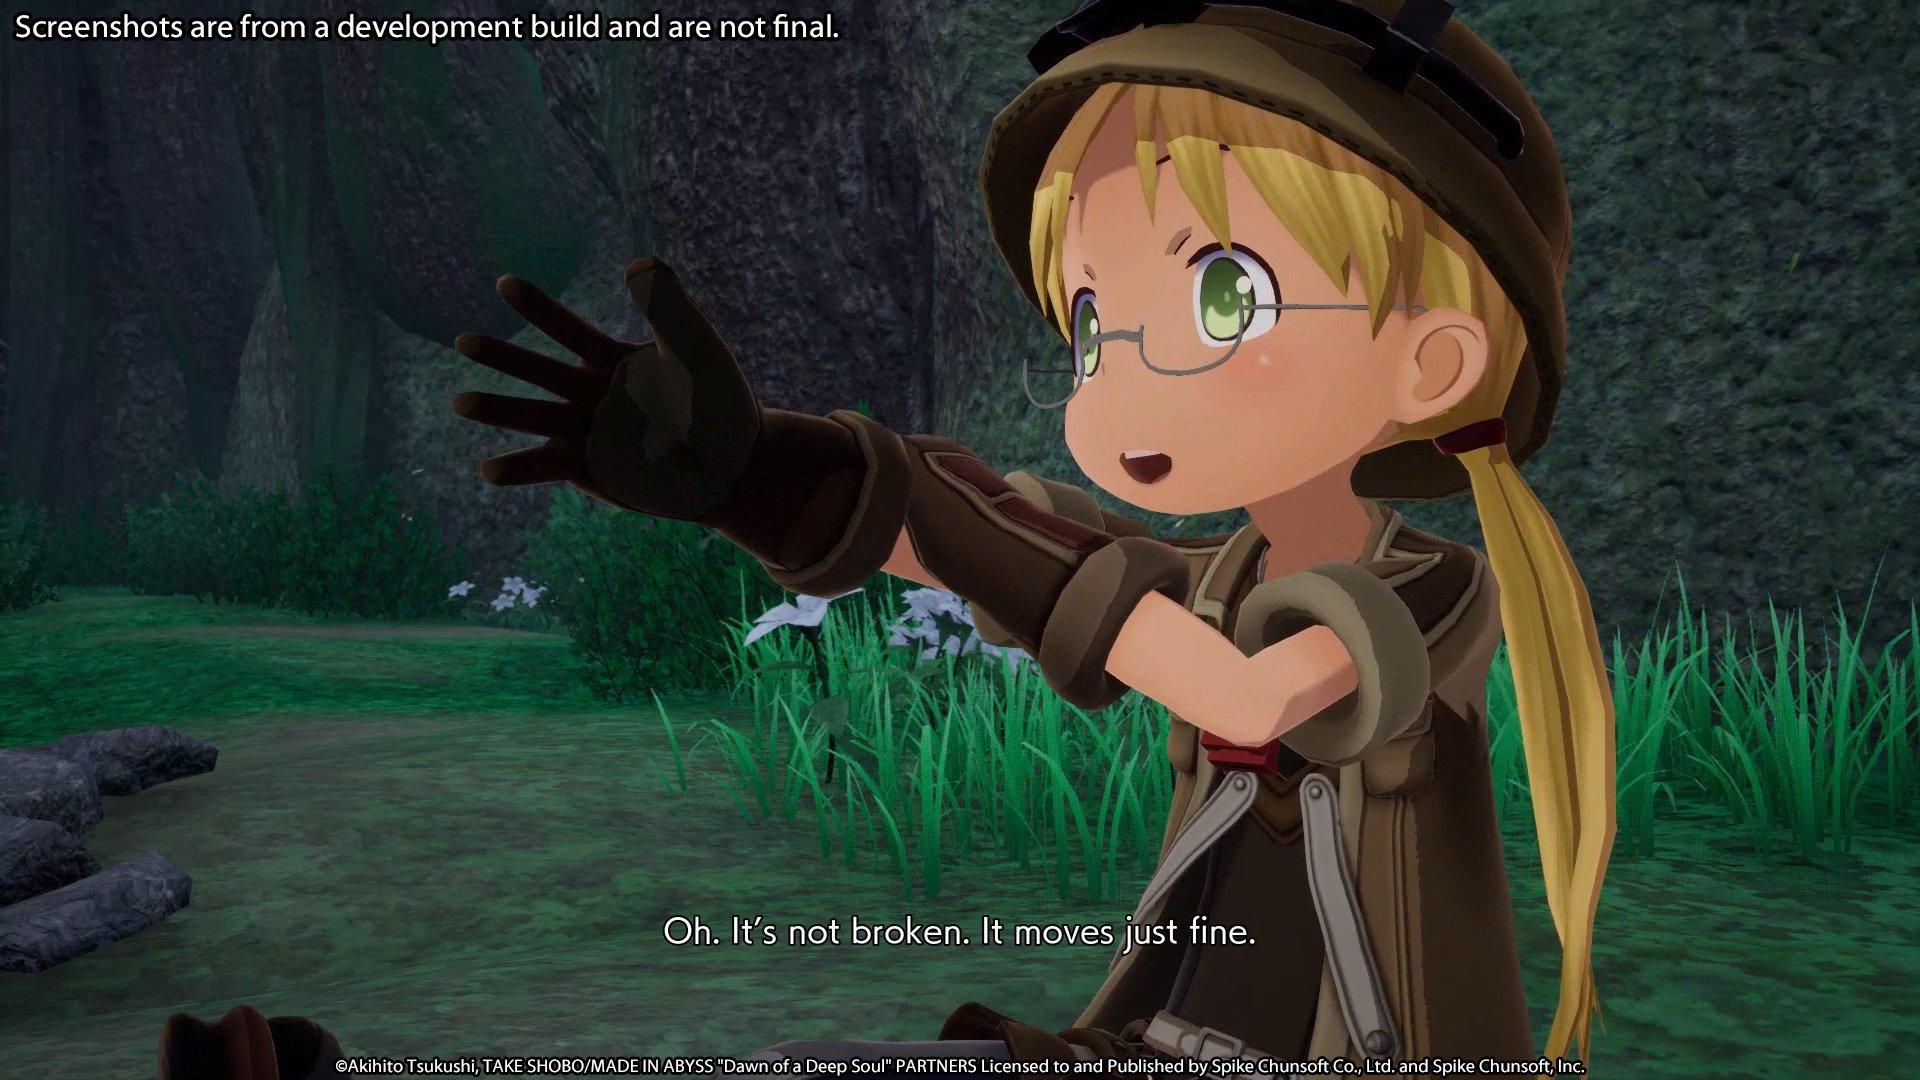 Made in Abyss: Binary Star Falling into Darkness - PlayStation 4